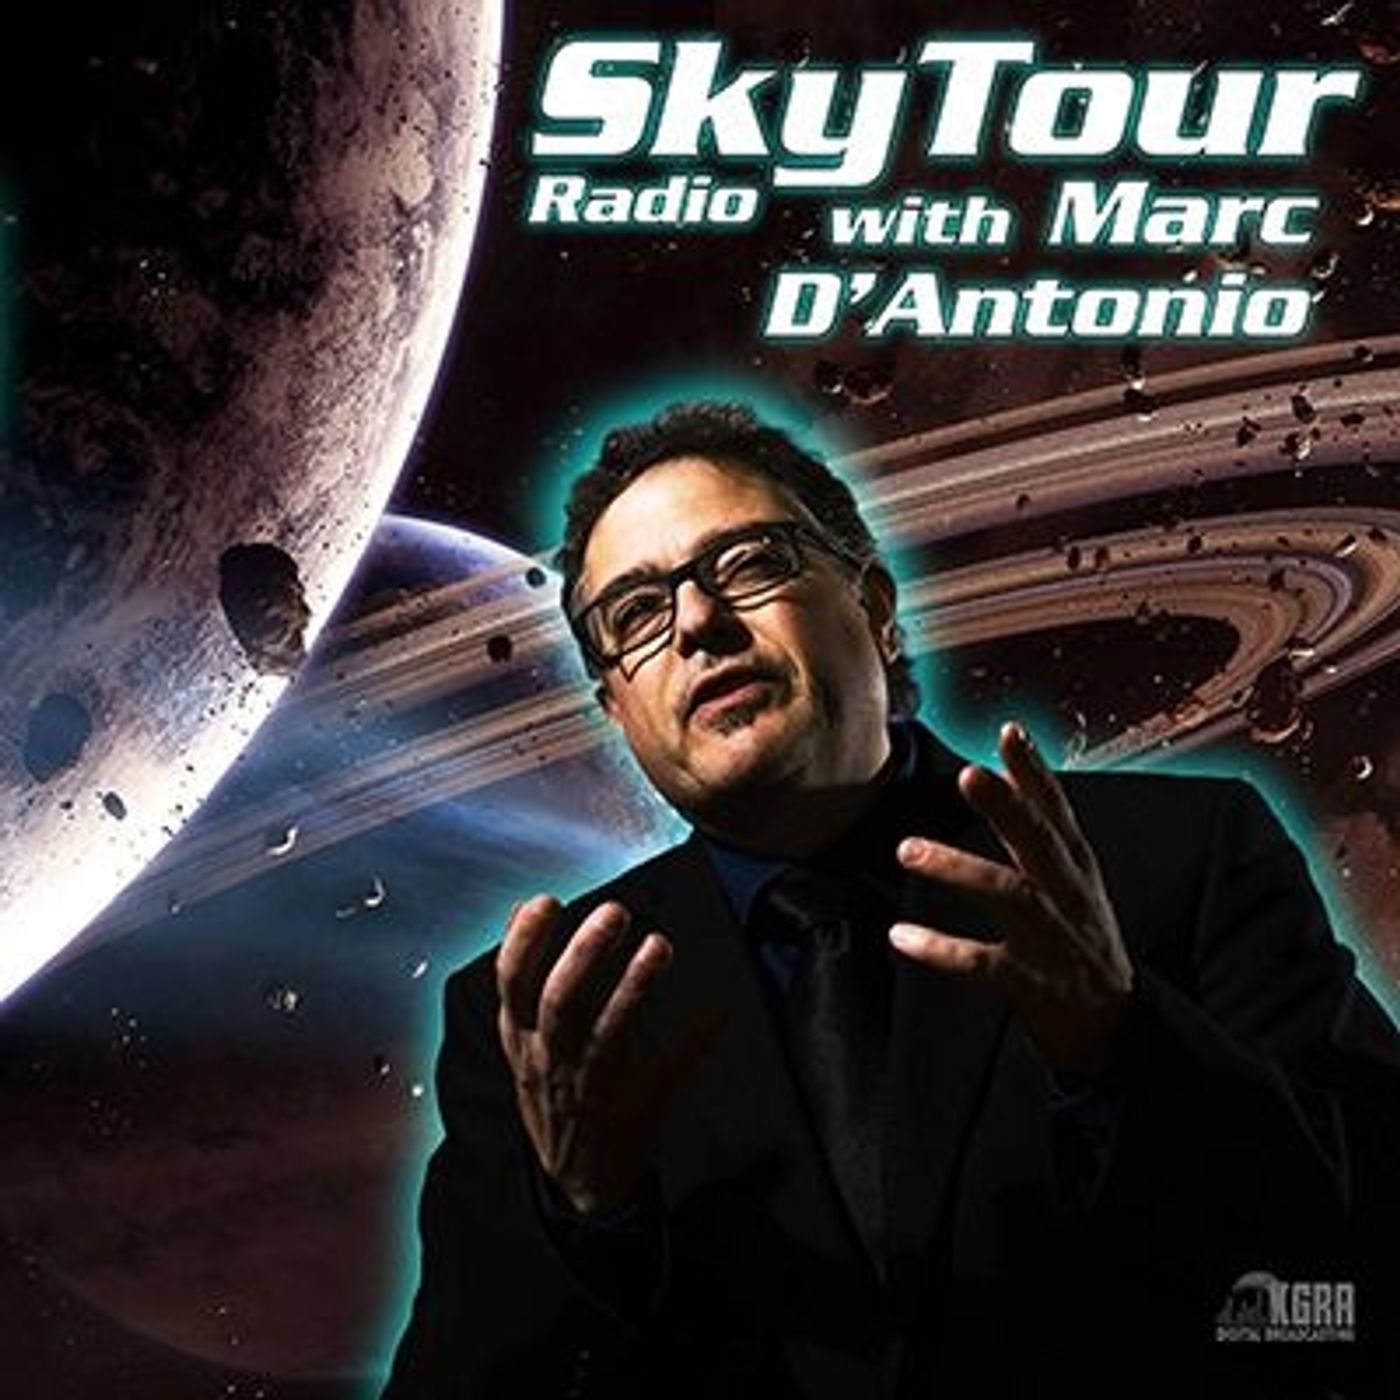 SkyTour Radio with Marc D'Antonio - How UFO's Actually Can Work!